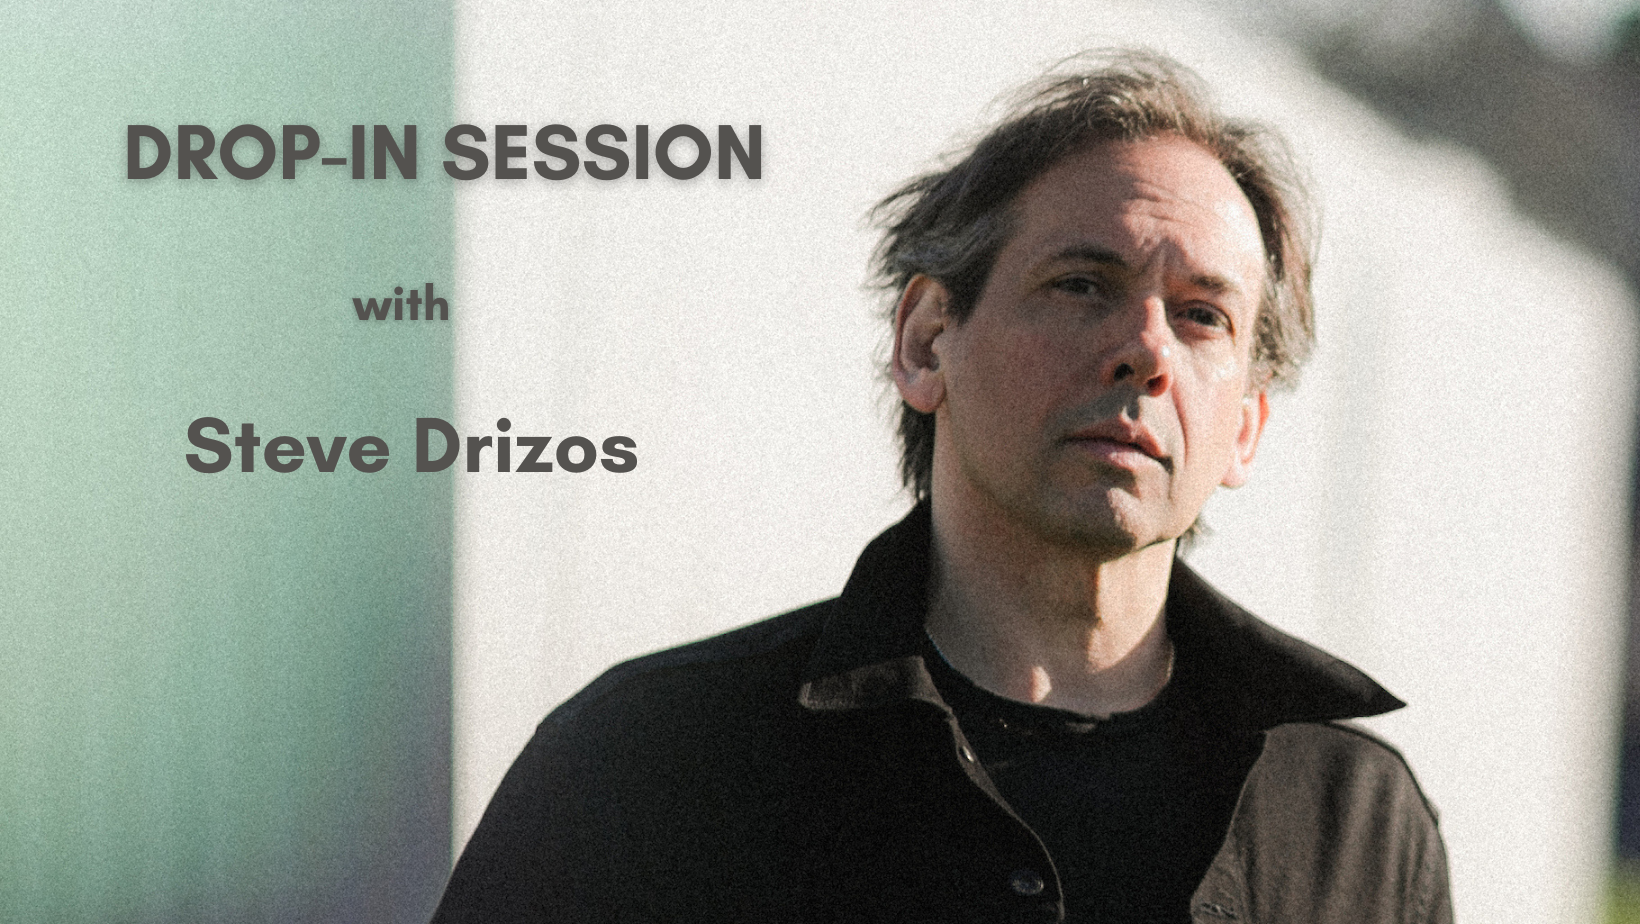 Drop-In Session with Steve Drizos